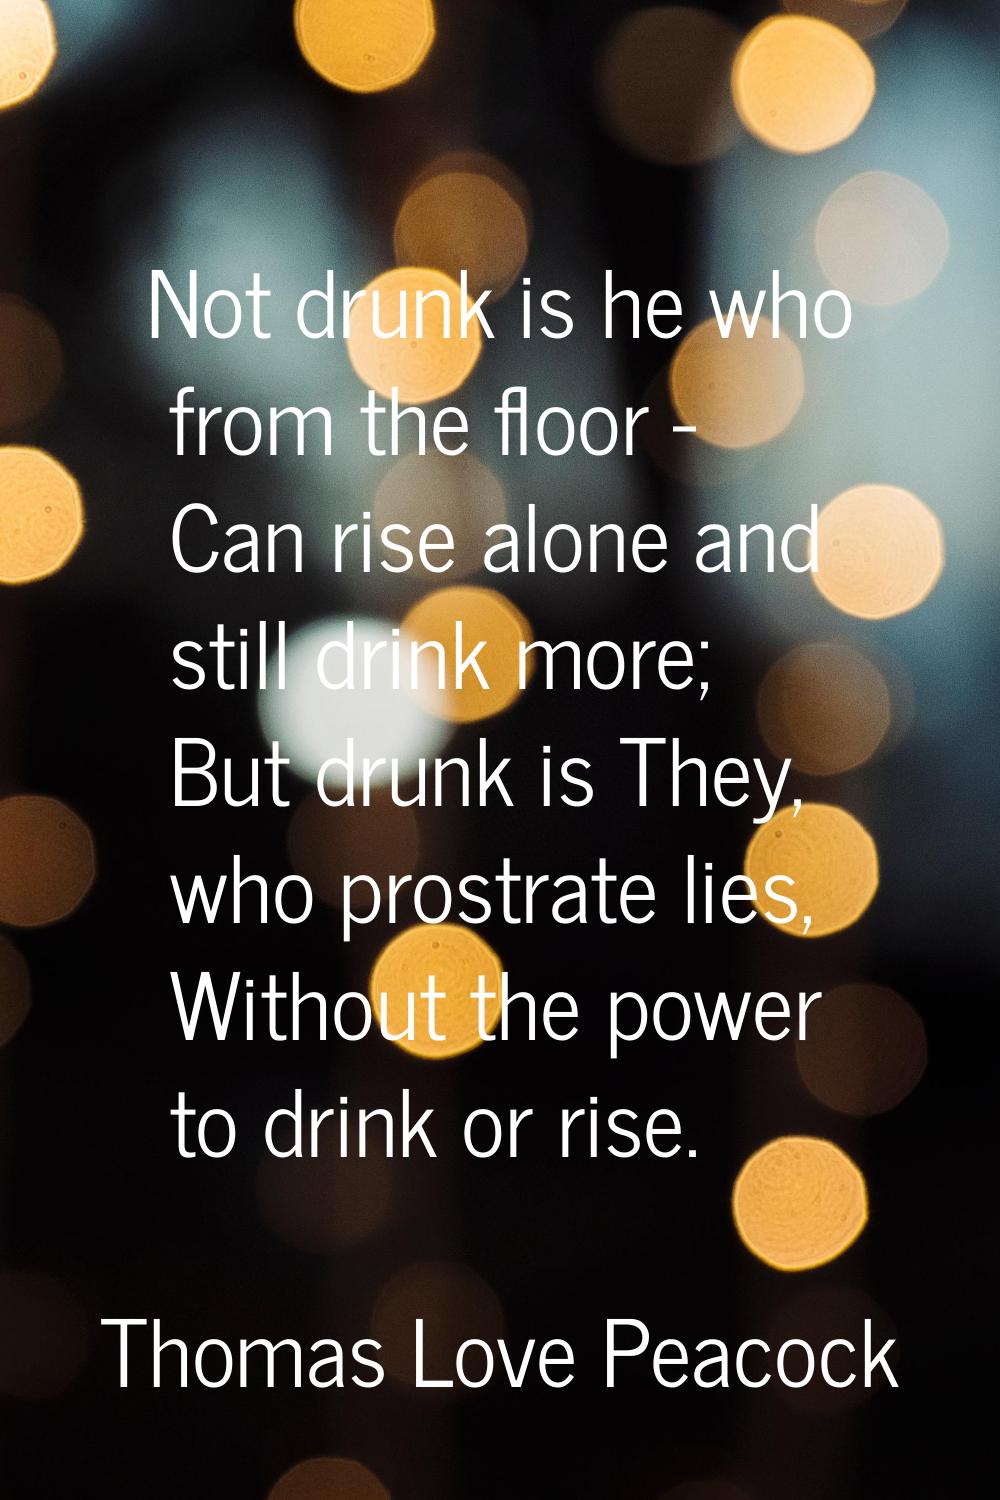 Not drunk is he who from the floor - Can rise alone and still drink more; But drunk is They, who pr